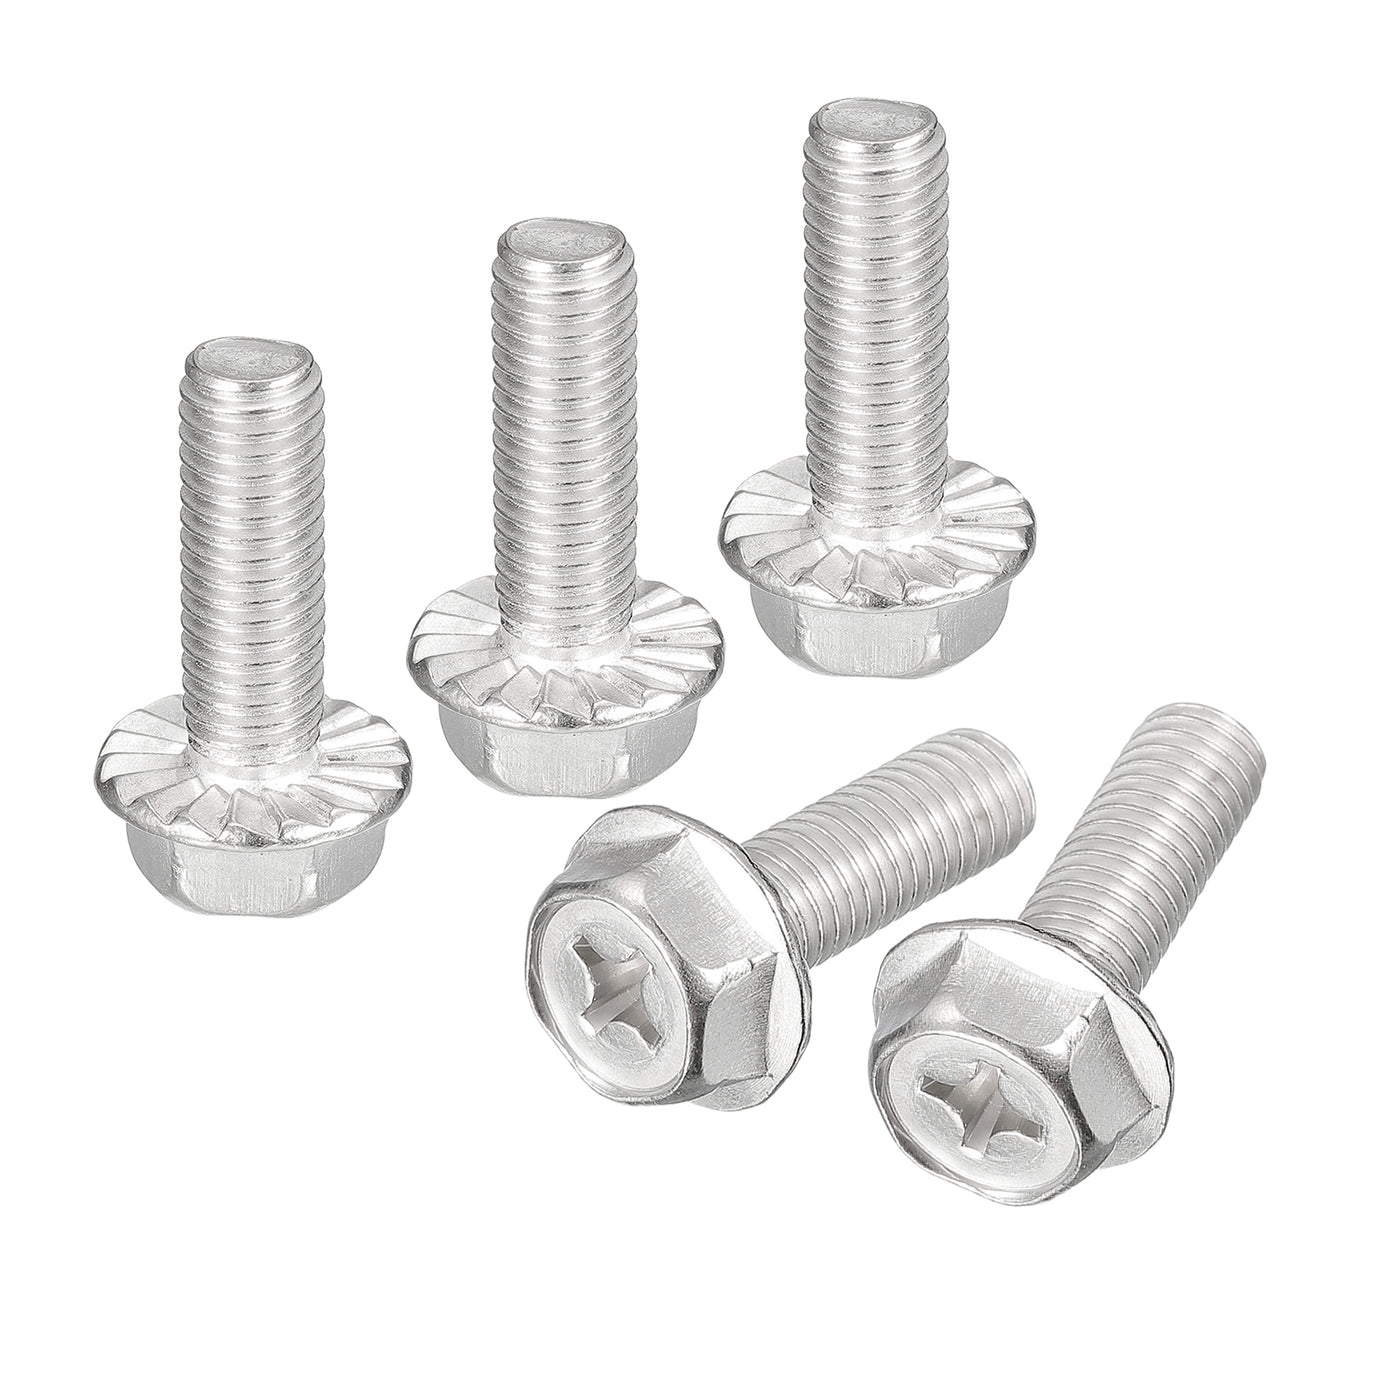 uxcell Uxcell M8x25mm Phillips Hex Head Flange Bolts, 10pcs 304 Stainless Steel Screws